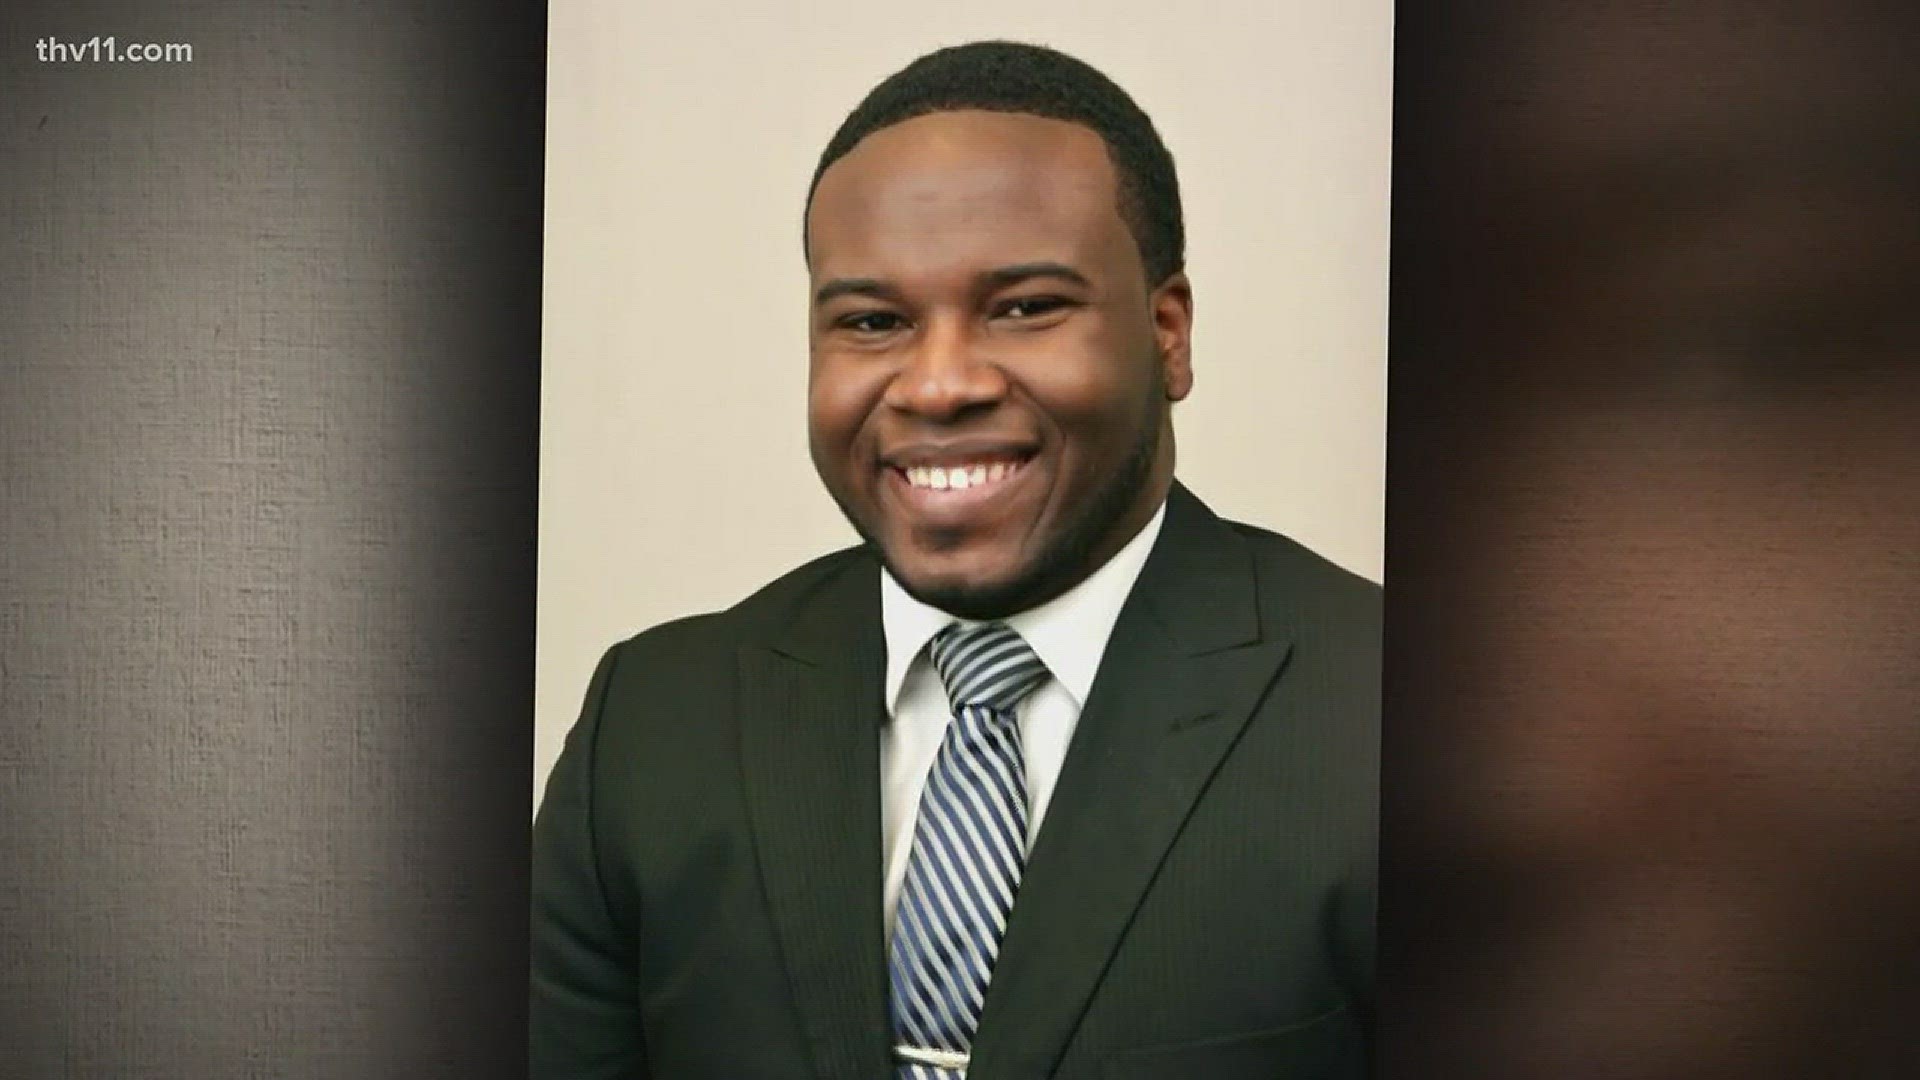 Family, friends and community members said goodbye to Botham Jean in Dallas today.